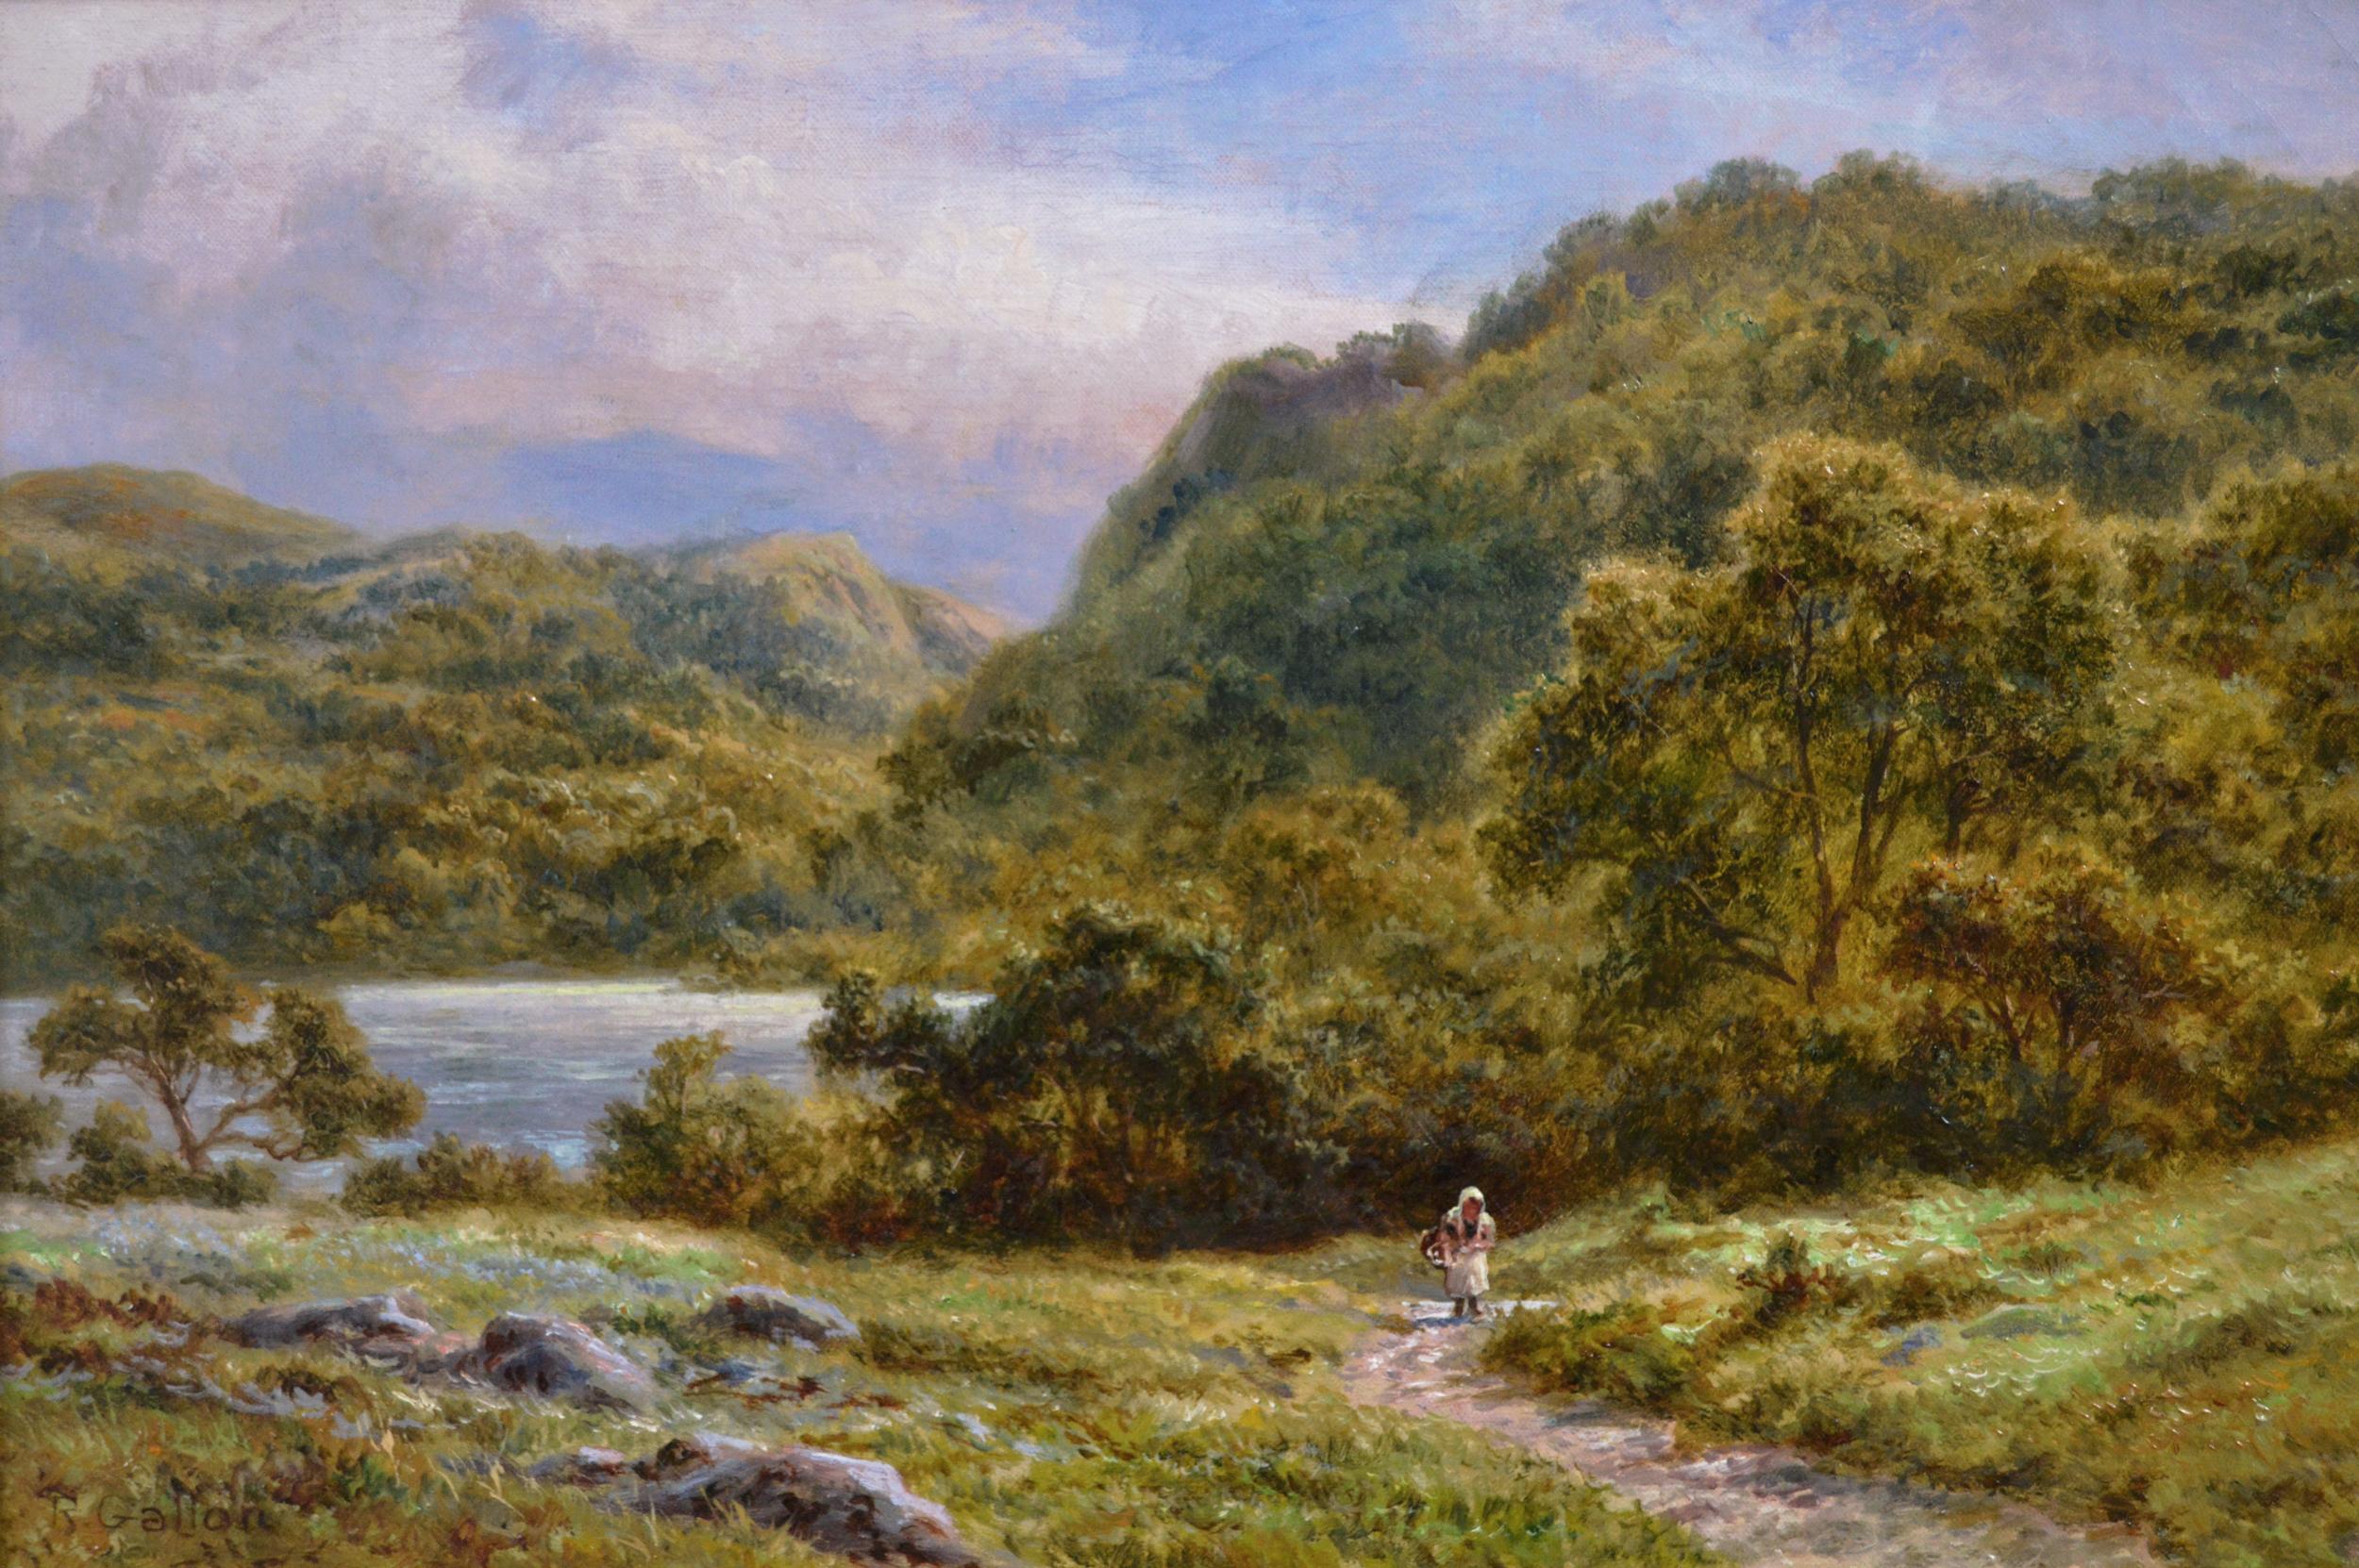 **PLEASE NOTE: EACH PAINTING INCLUDING THE FRAME MEASURES 20.5 INCHES x 26.5 INCHES**

Robert Gallon
British, (1845-1925)
A Glimpse of Loch Katrine & West Brill, Buckinghamshire
Oil on canvas, pair, both signed & inscribed in pencil to stretcher